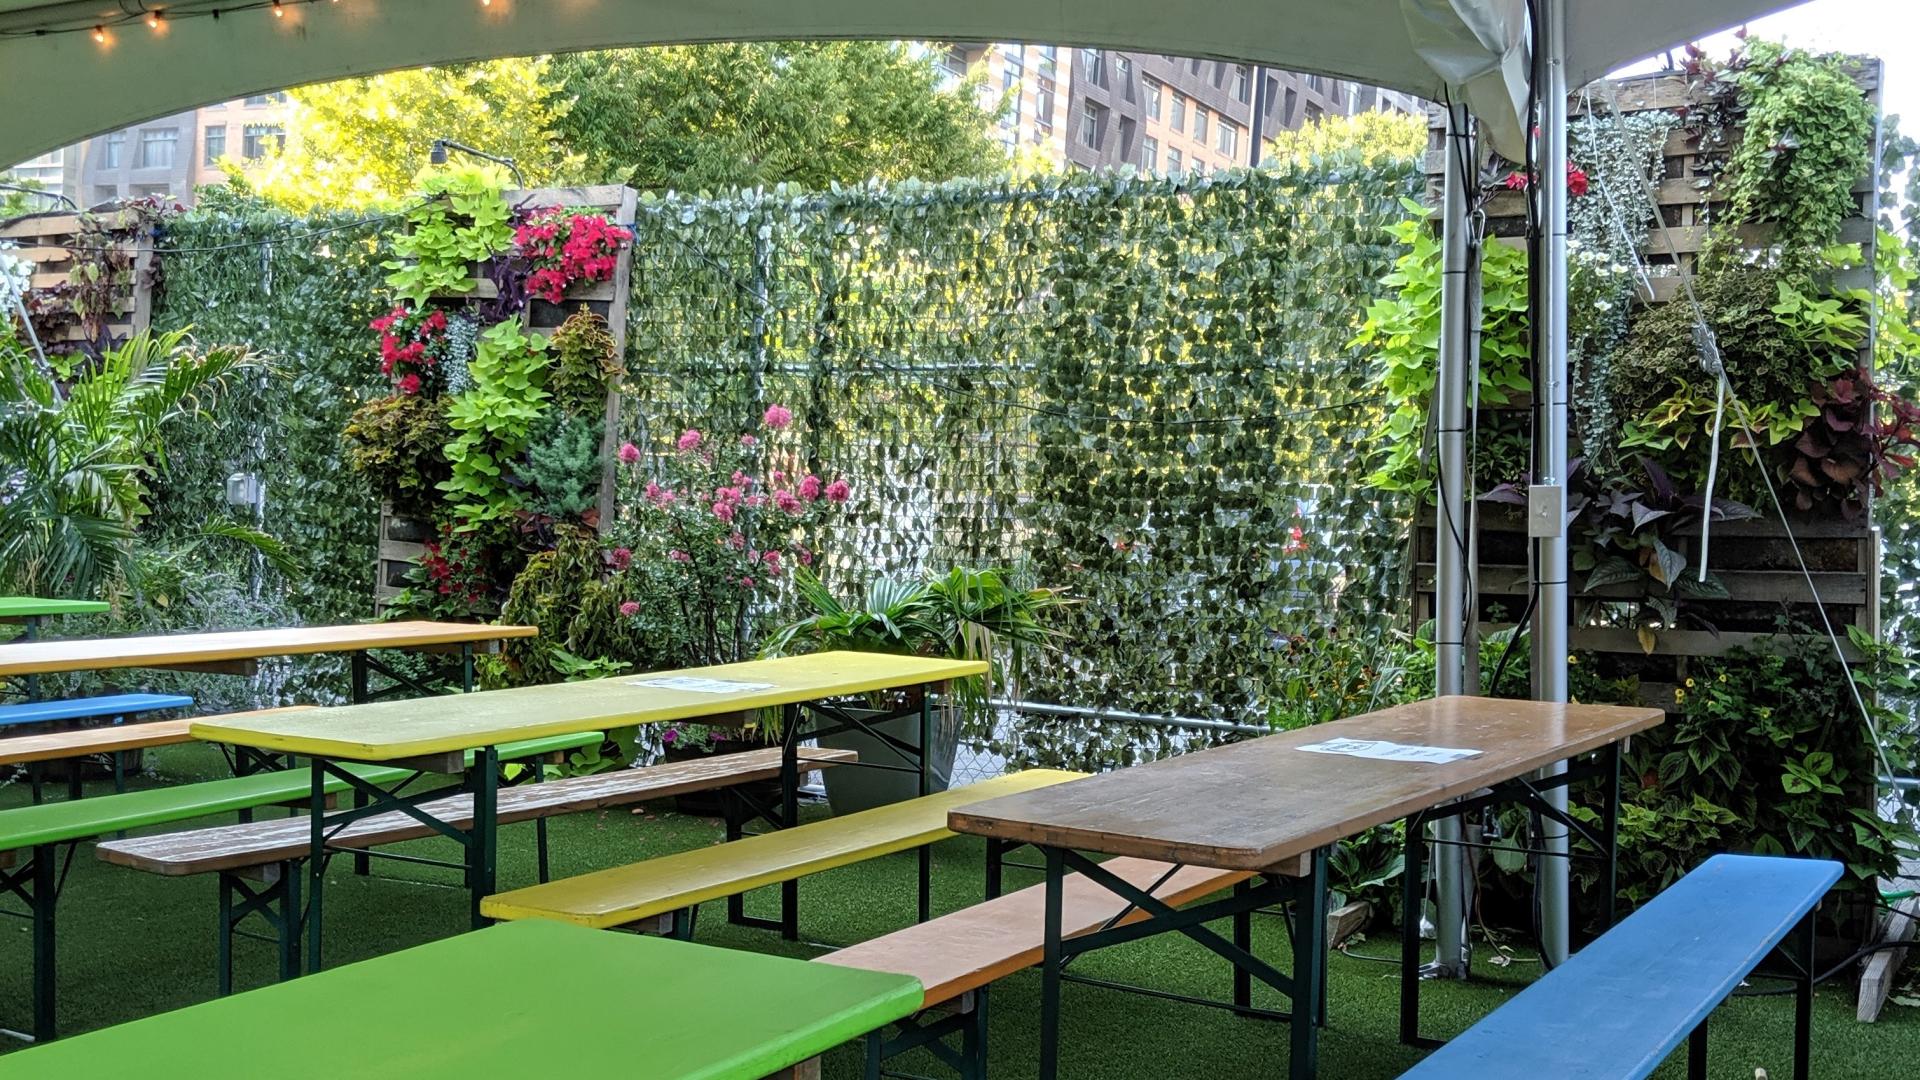 Beer Gardens for Rent in Washington, DC